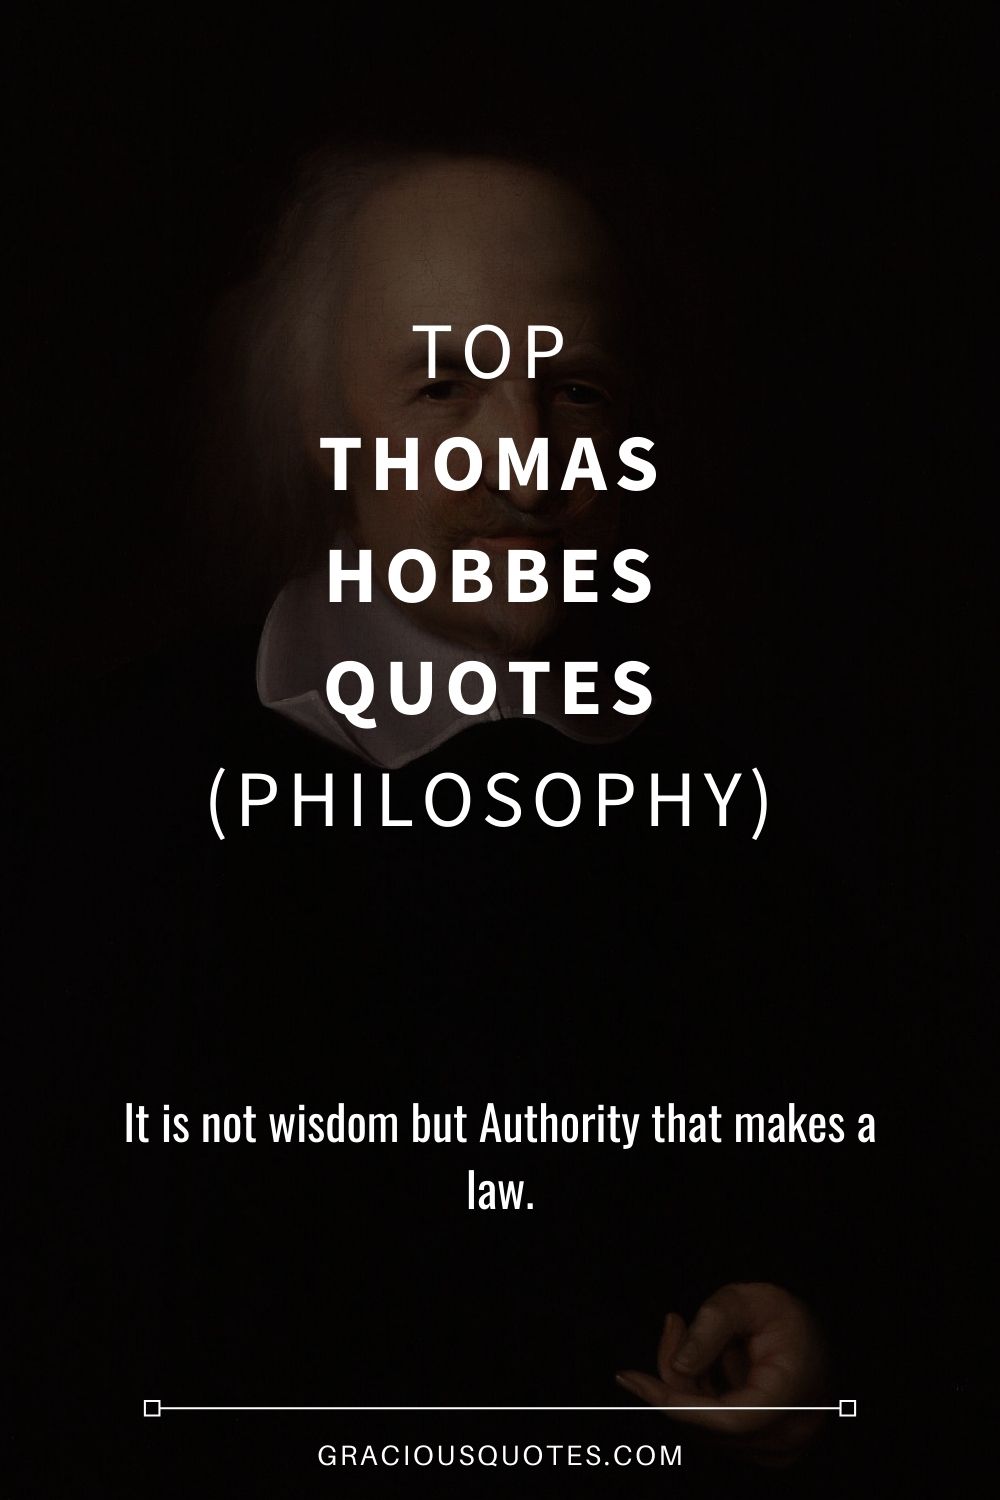 Top Thomas Hobbes Quotes (PHILOSOPHY) - Gracious Quotes